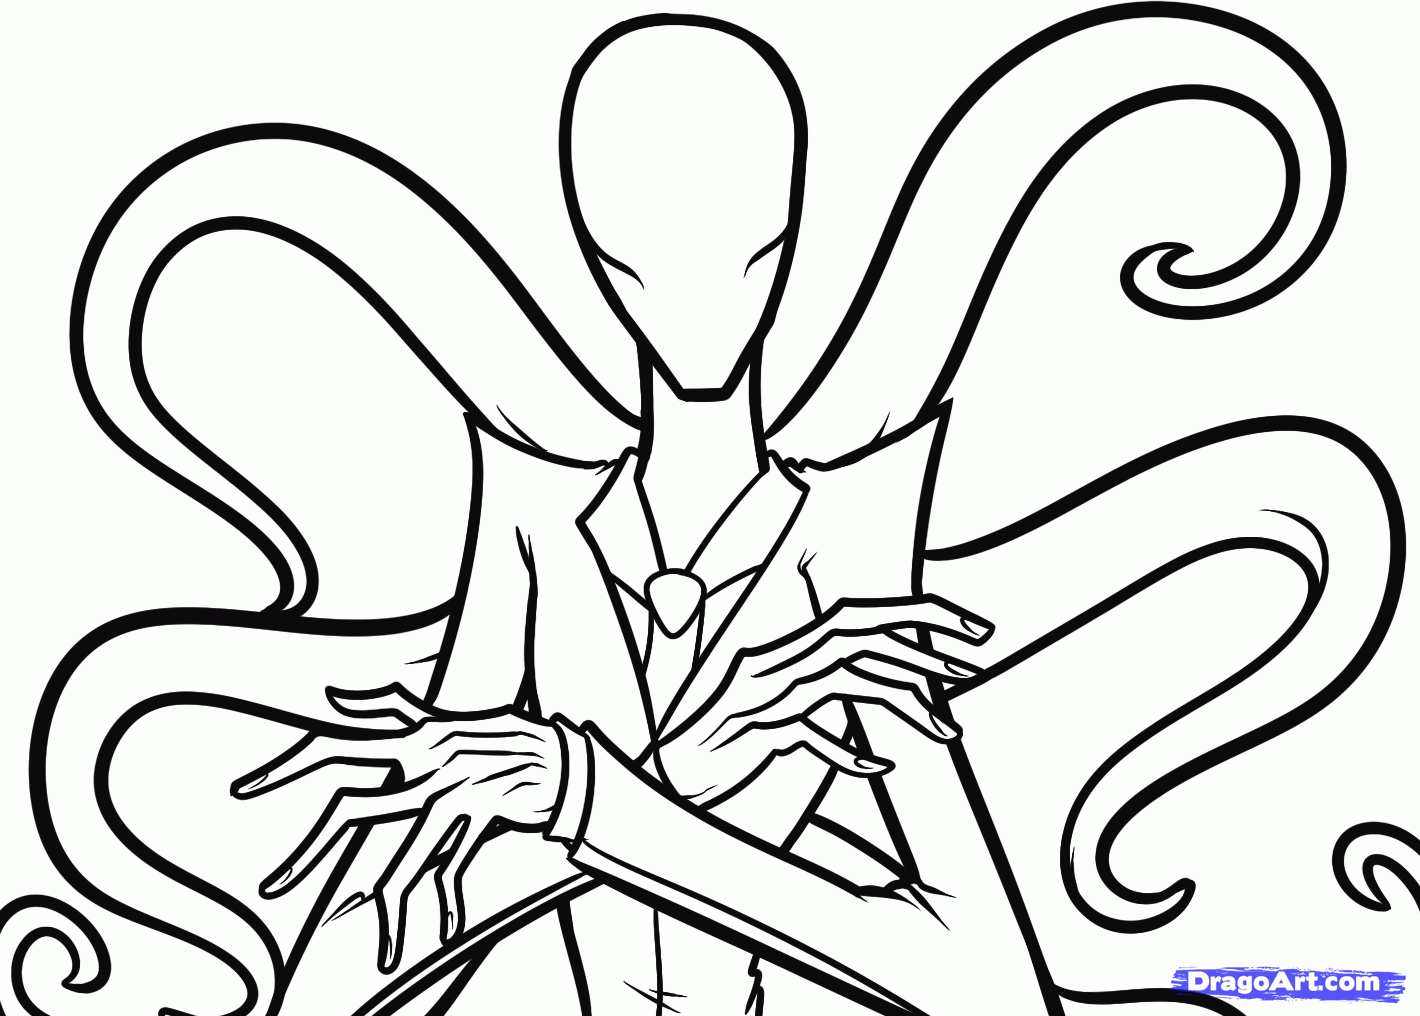 How to Draw Slenderman, Slender Man, Step by Step, Characters, Pop Culture,  FREE Online Drawing Tutori… | Coloring pages, Halloween coloring pages,  Halloween poster